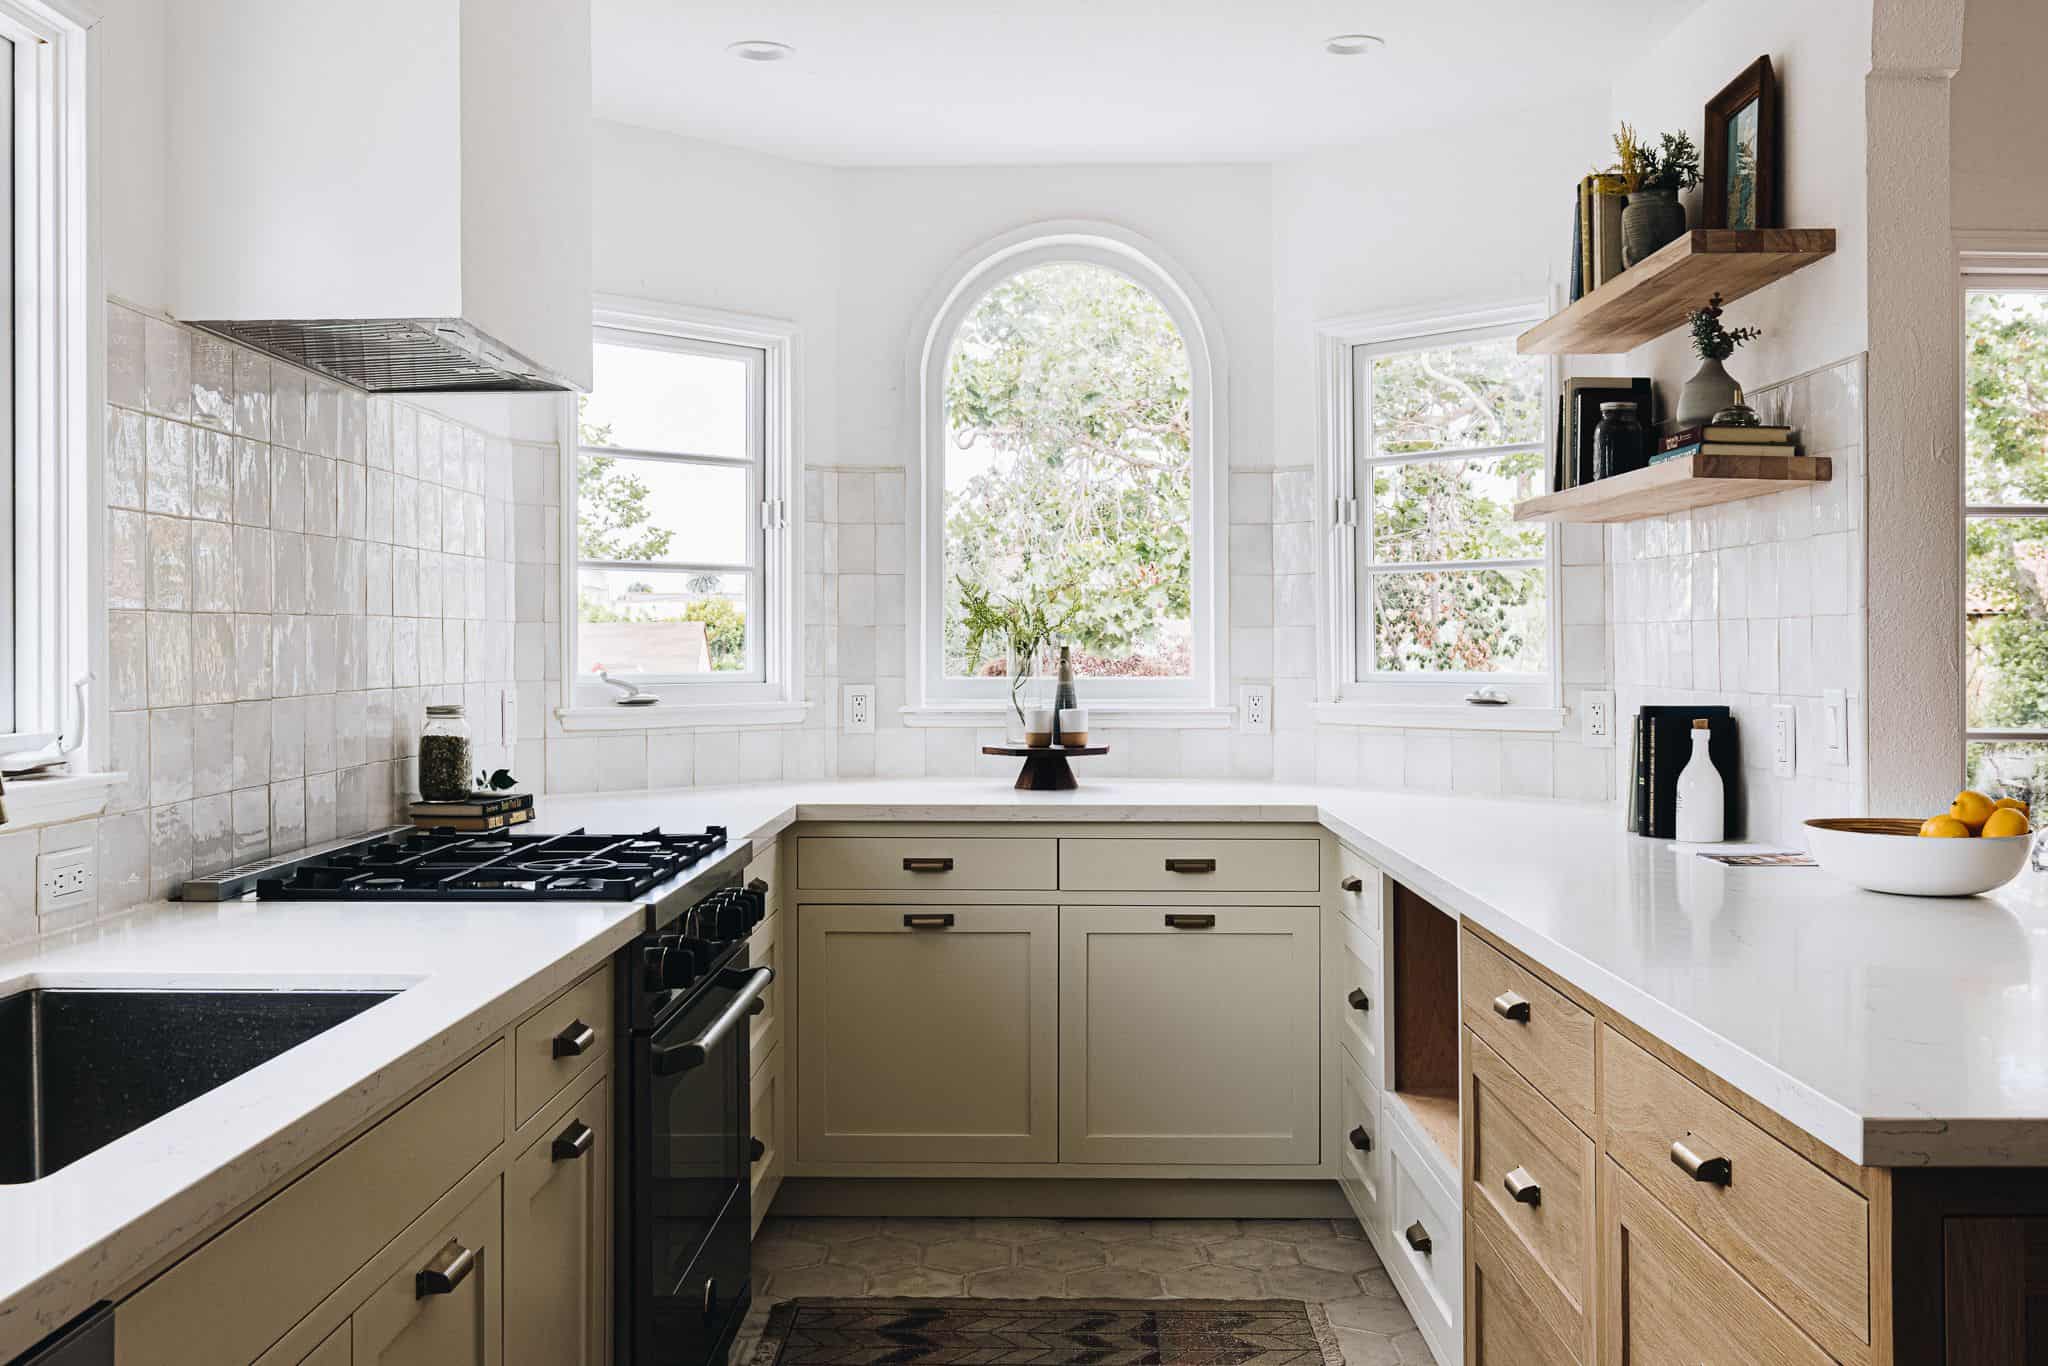 Should Wall Color Match Kitchen Cabinets? [Tips+Tricks Included]